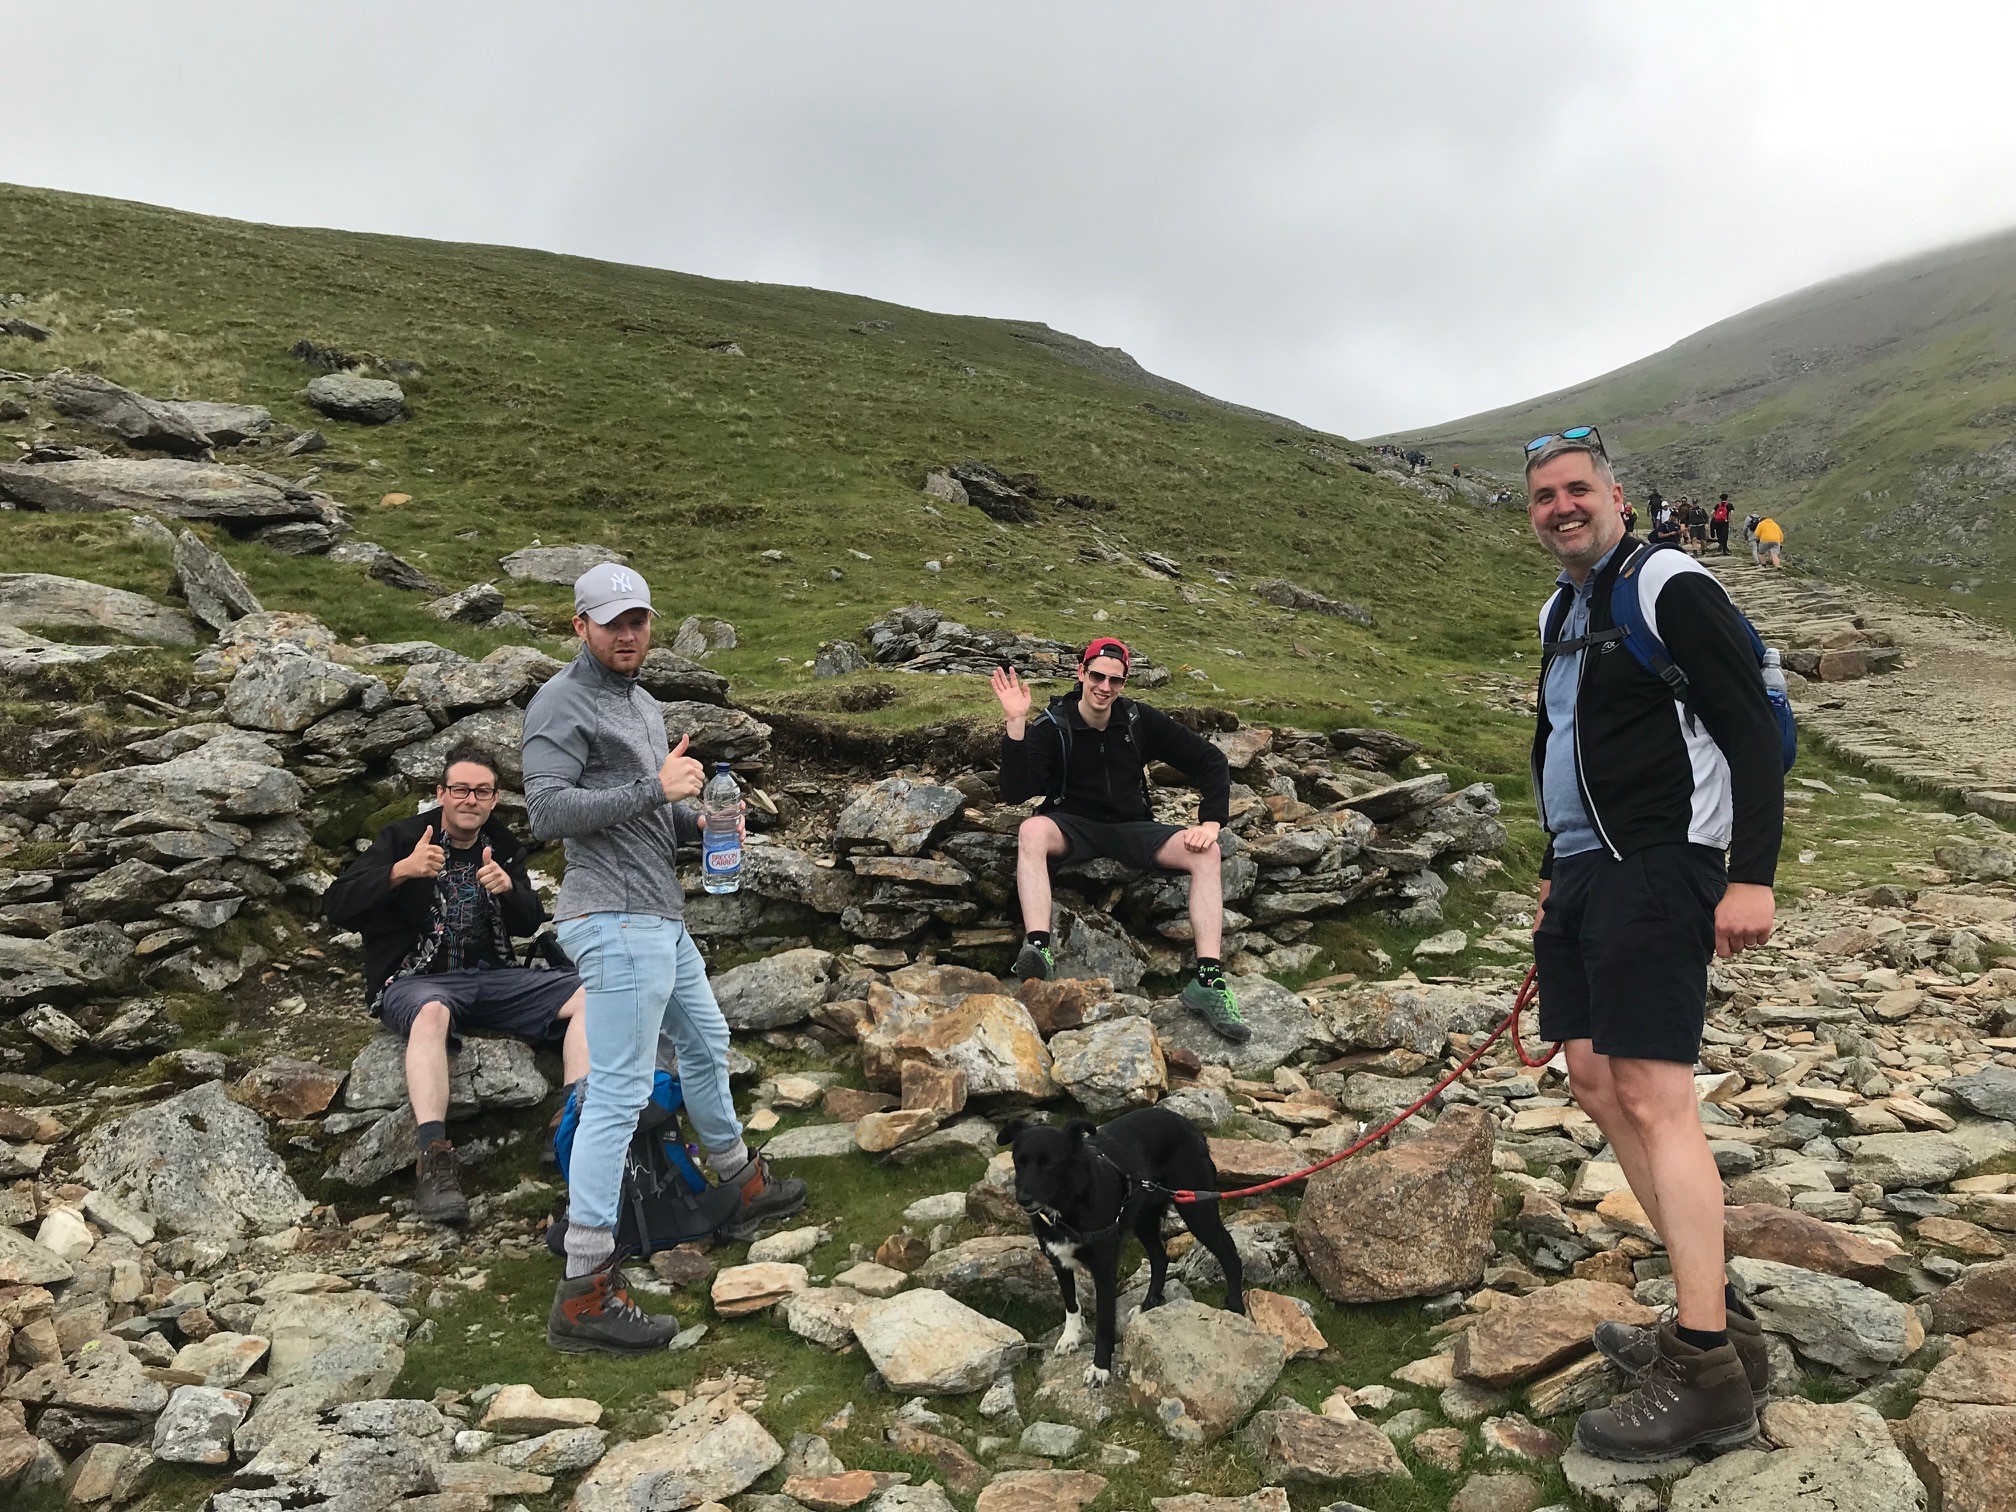 Charity Snowdon Climb Raises over £8,600 for Children’s Charity Molly Olly’s Wishes